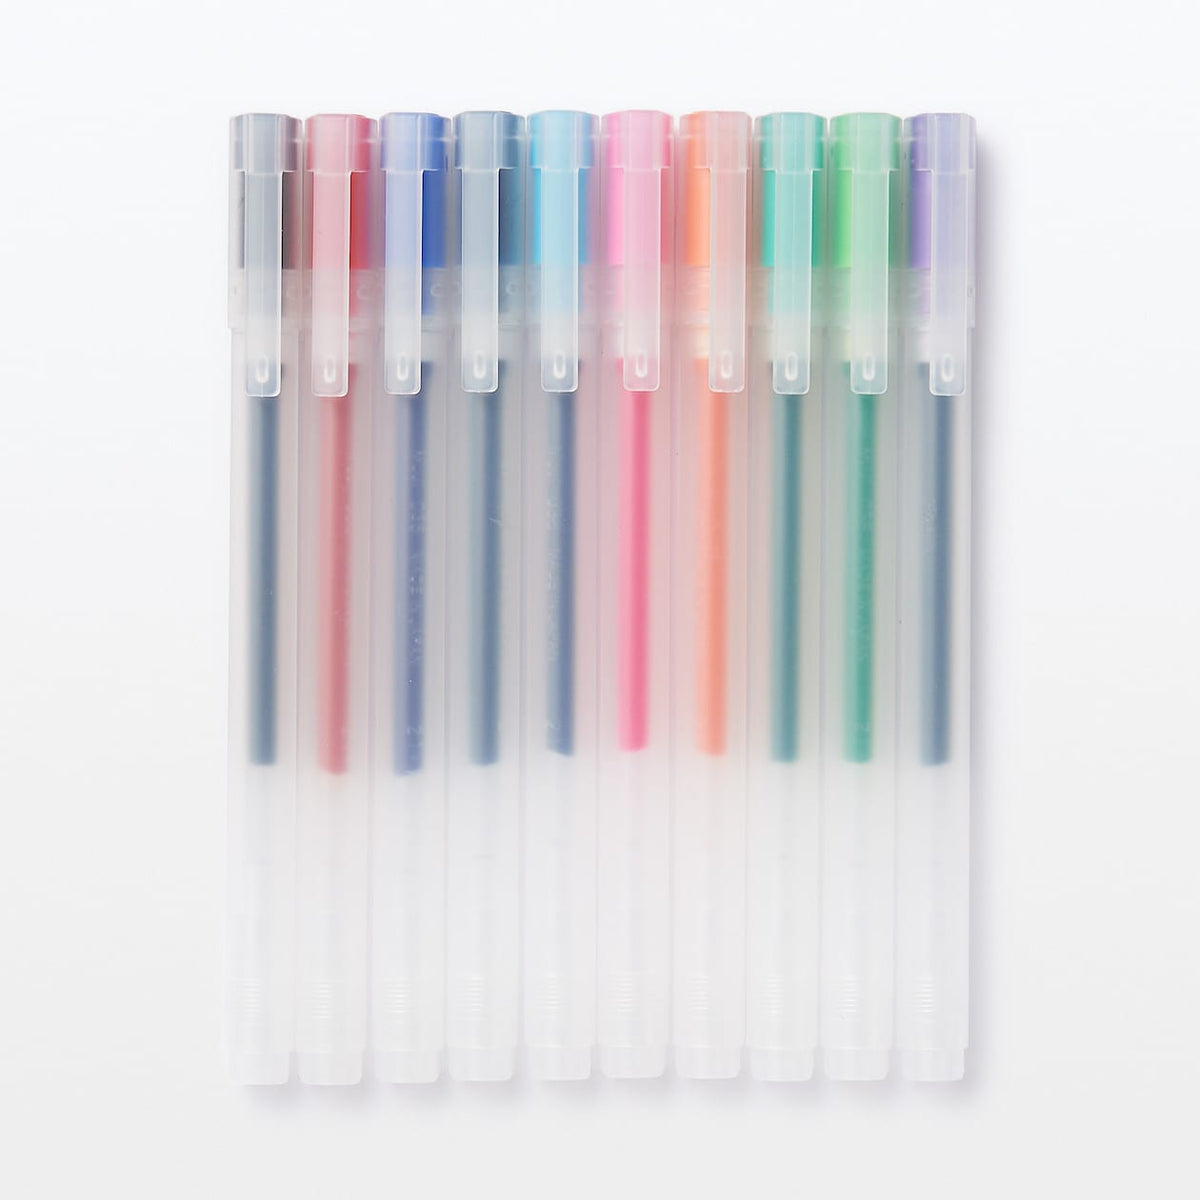 Colored Gel Ink Ball Point Pens - Set of 15